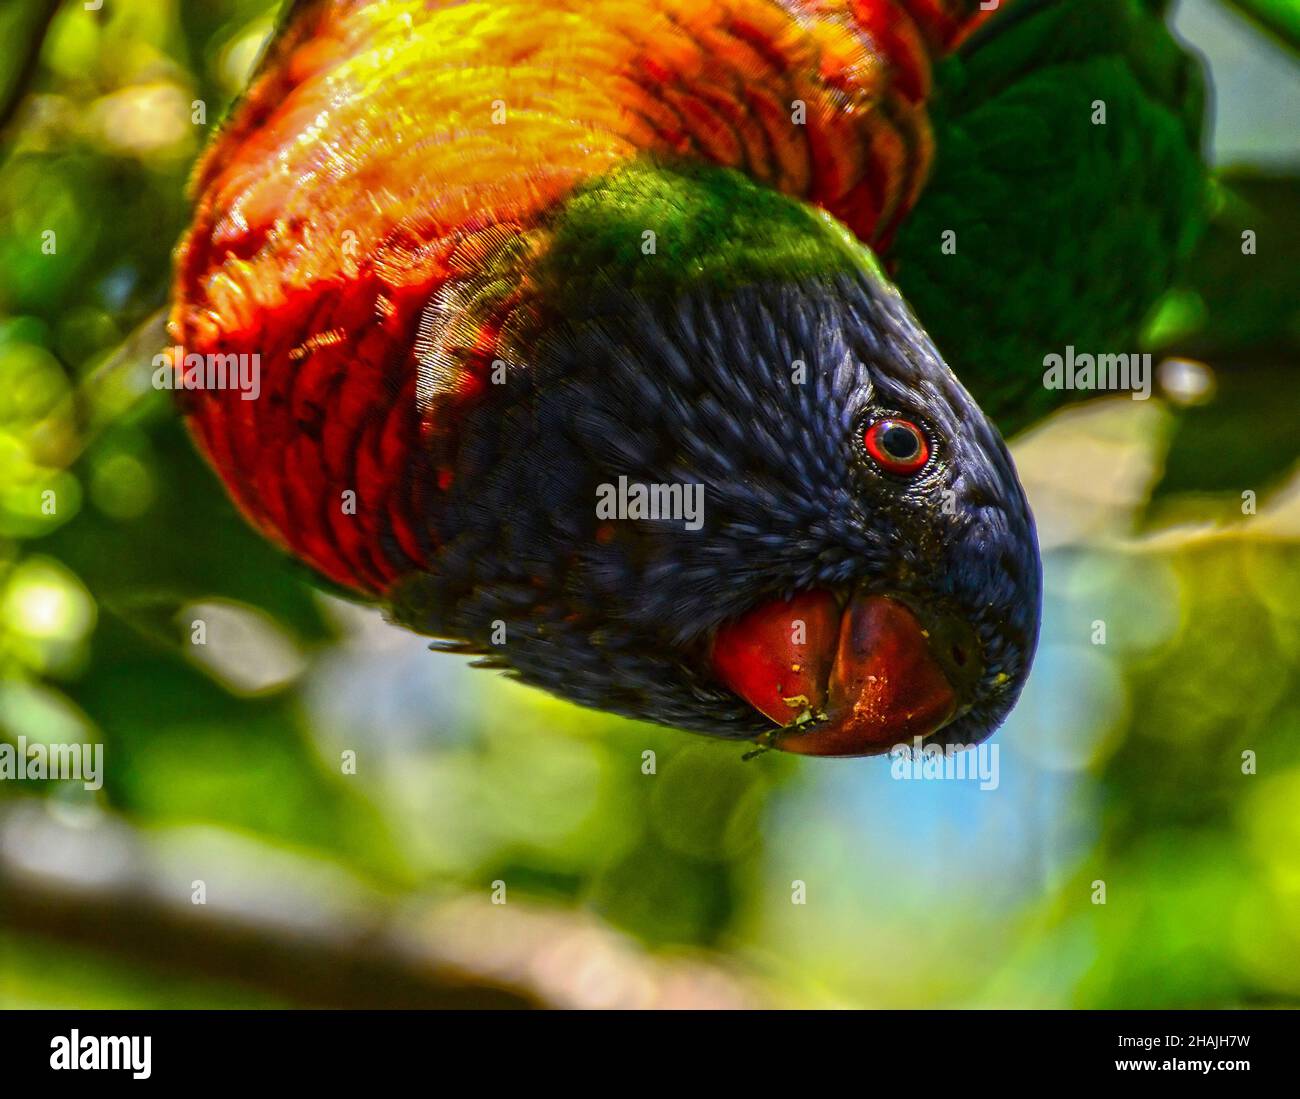 The rainbow lorikeet (Trichoglossus moluccanus) is a species of parrots native to Australia. Stock Photo